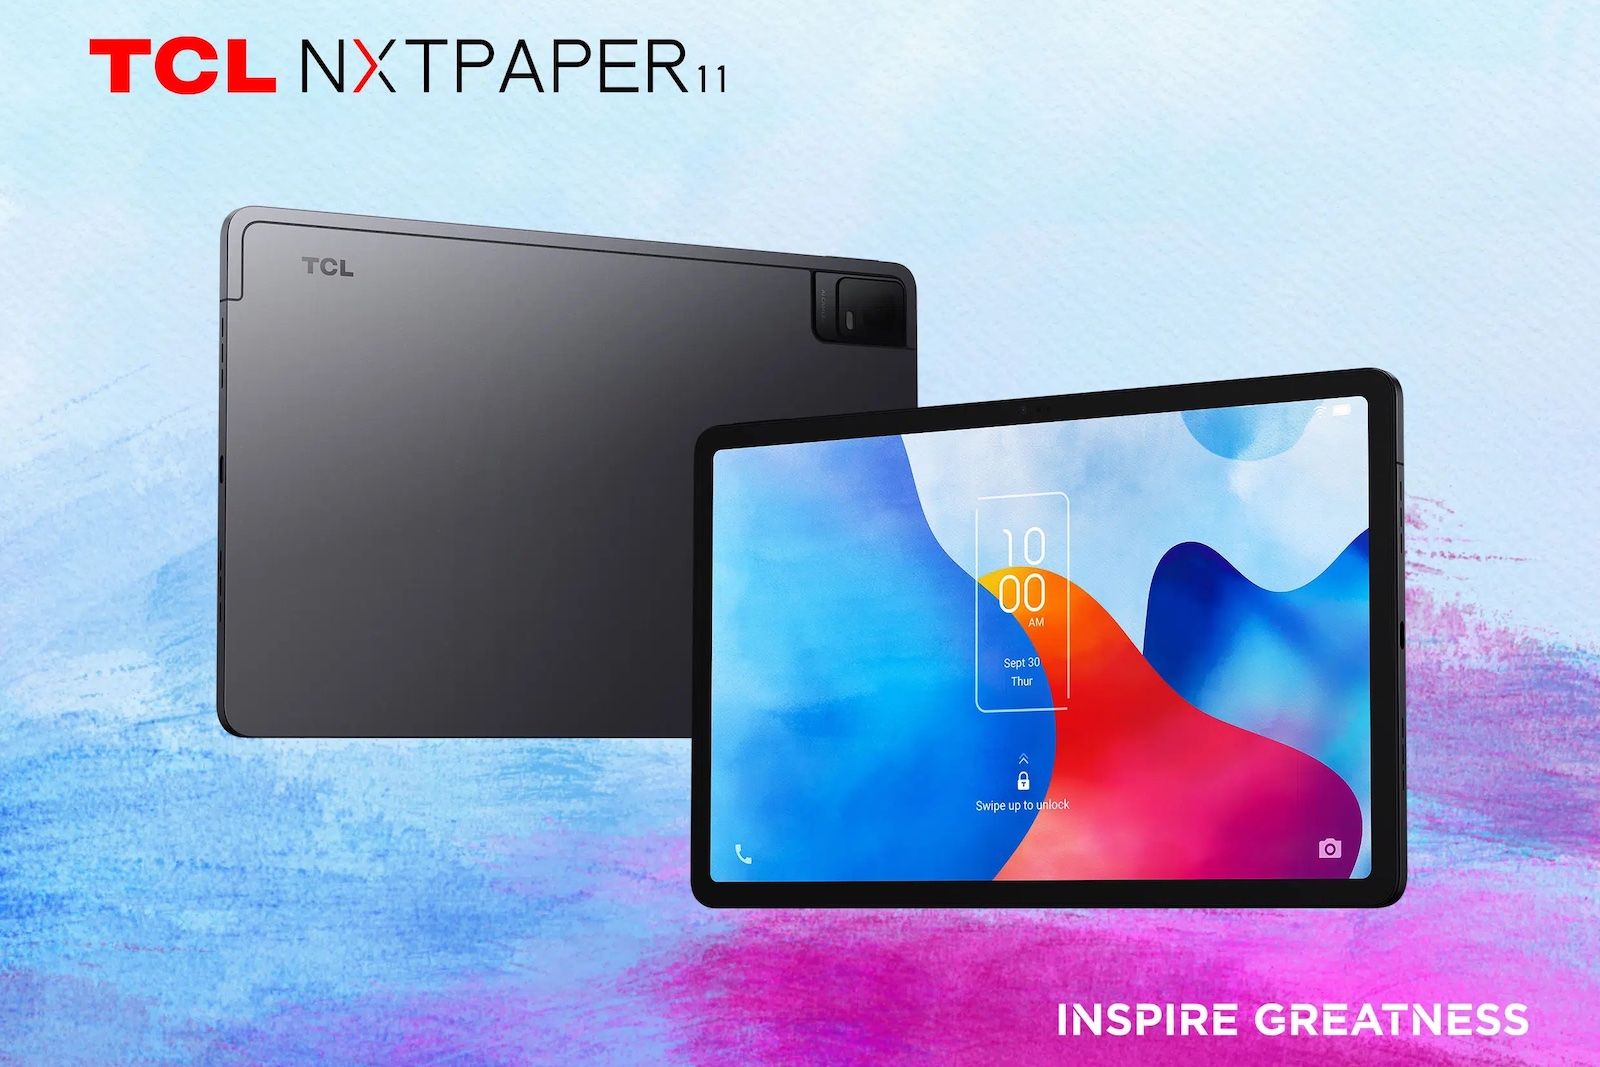 TCL NXTPAPER 11 front and back